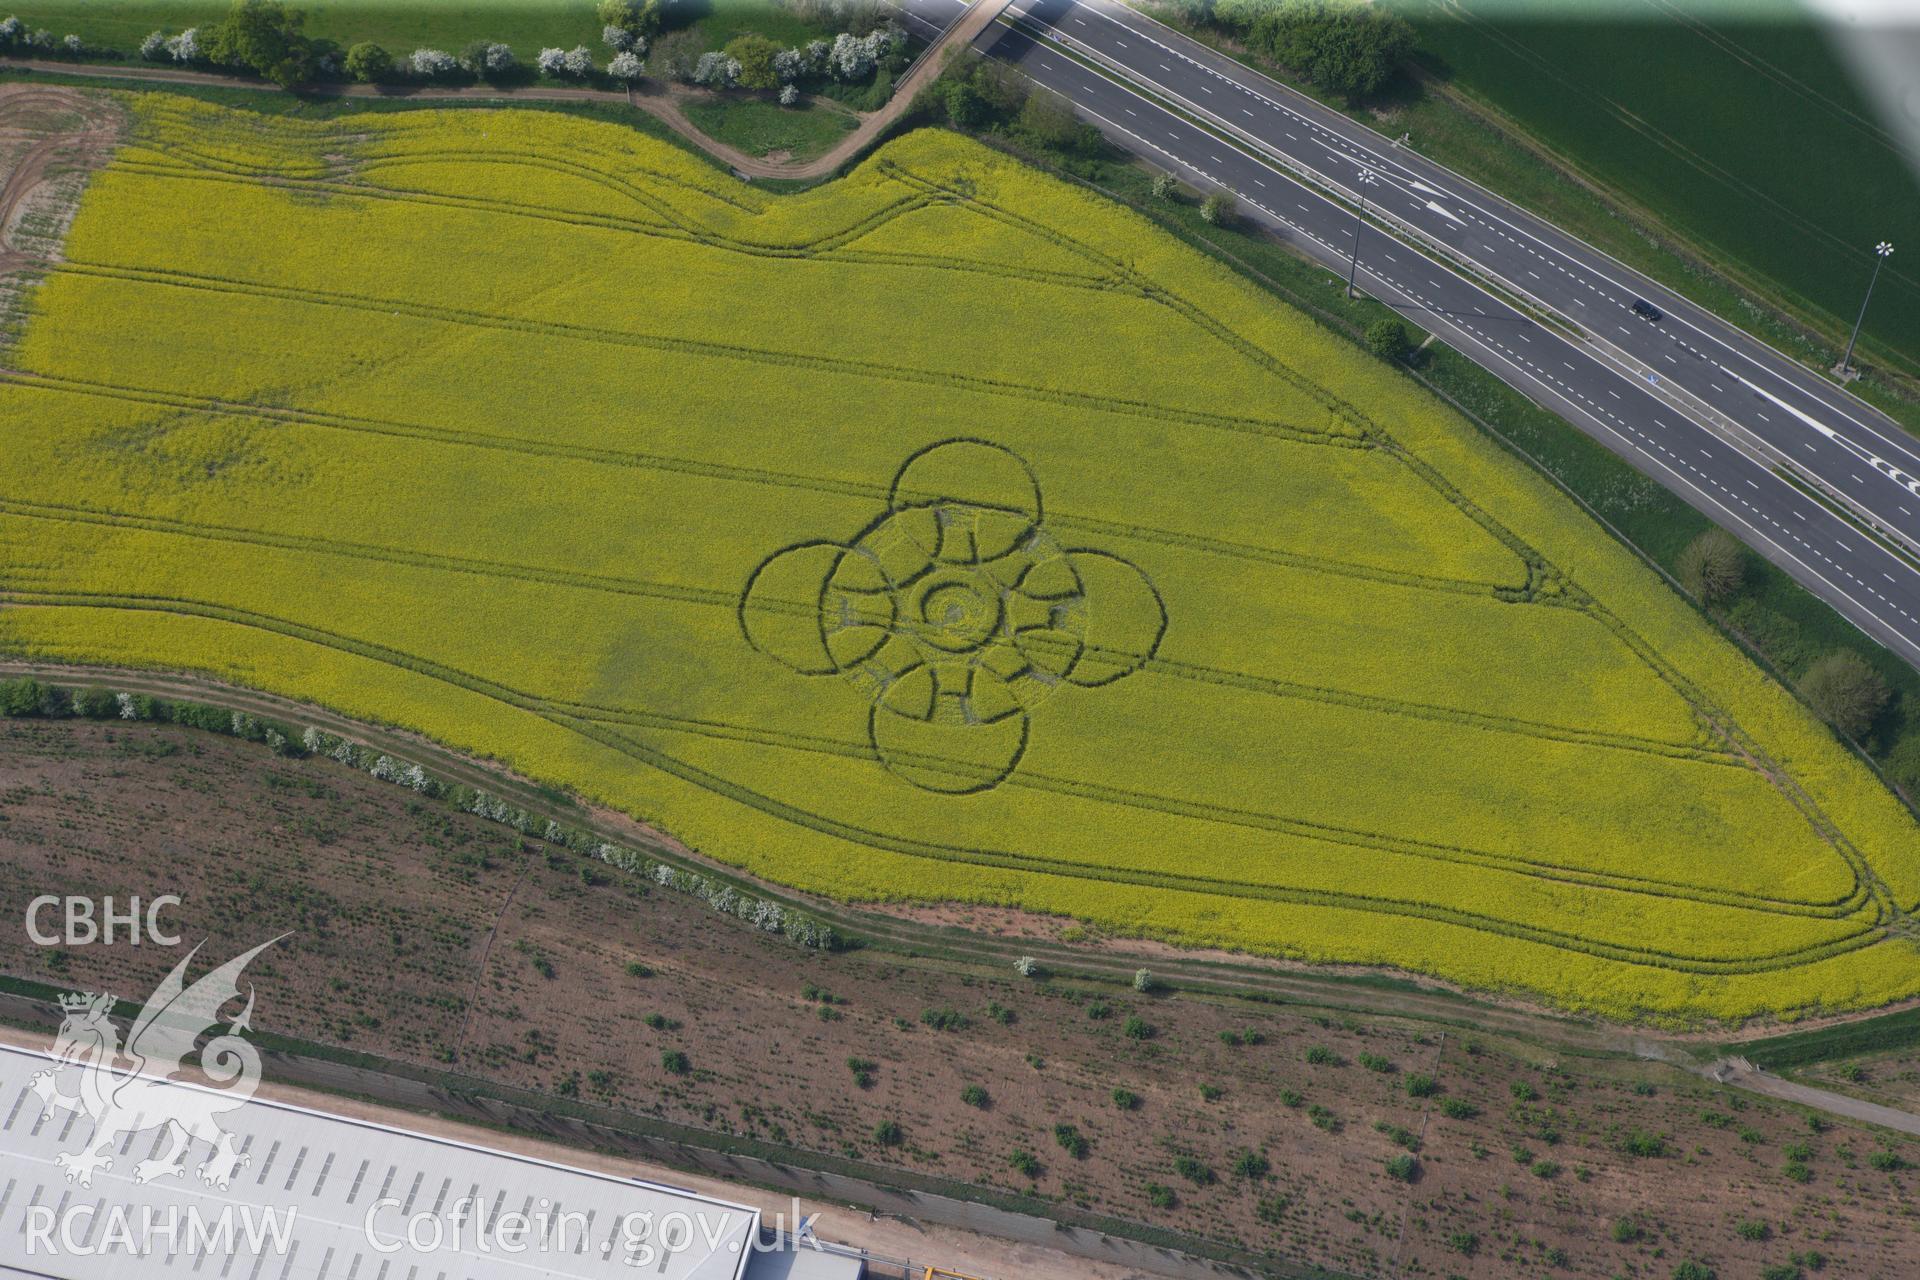 RCAHMW colour oblique photograph of Innage, Chepstow, modern crop circle. Taken by Toby Driver on 26/04/2011.